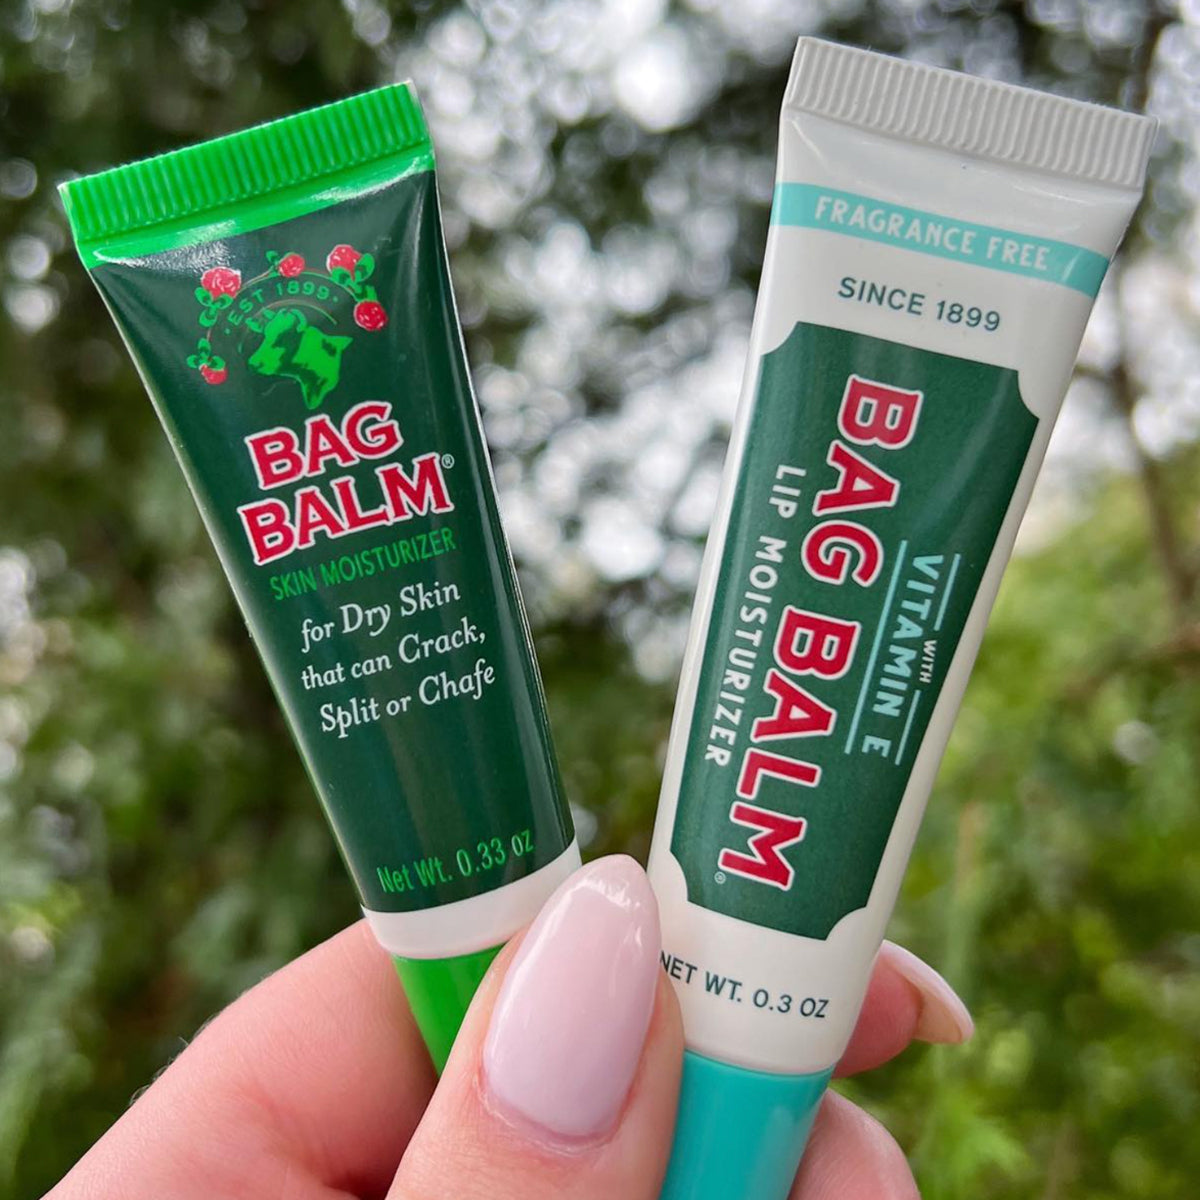 A person holding two tubes of Bag Balm Lip Moisturizer and Bag Balm Skin Moisturizer